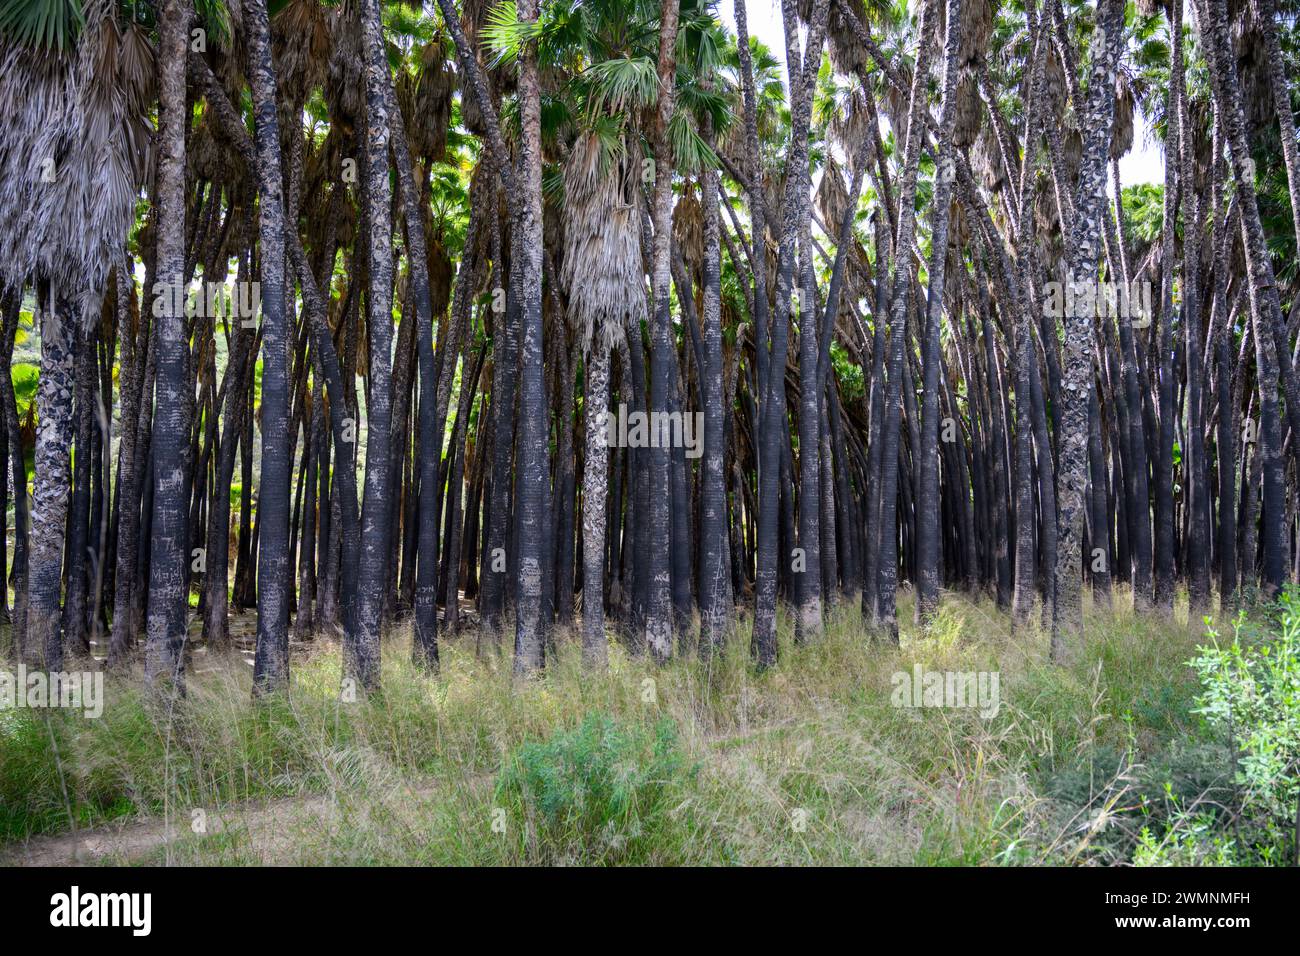 Abandoned Washingtonia palm plantation. a forest fire has damaged the tree trunks and inconsiderate hikers have carved their names into the tree trunk Stock Photo